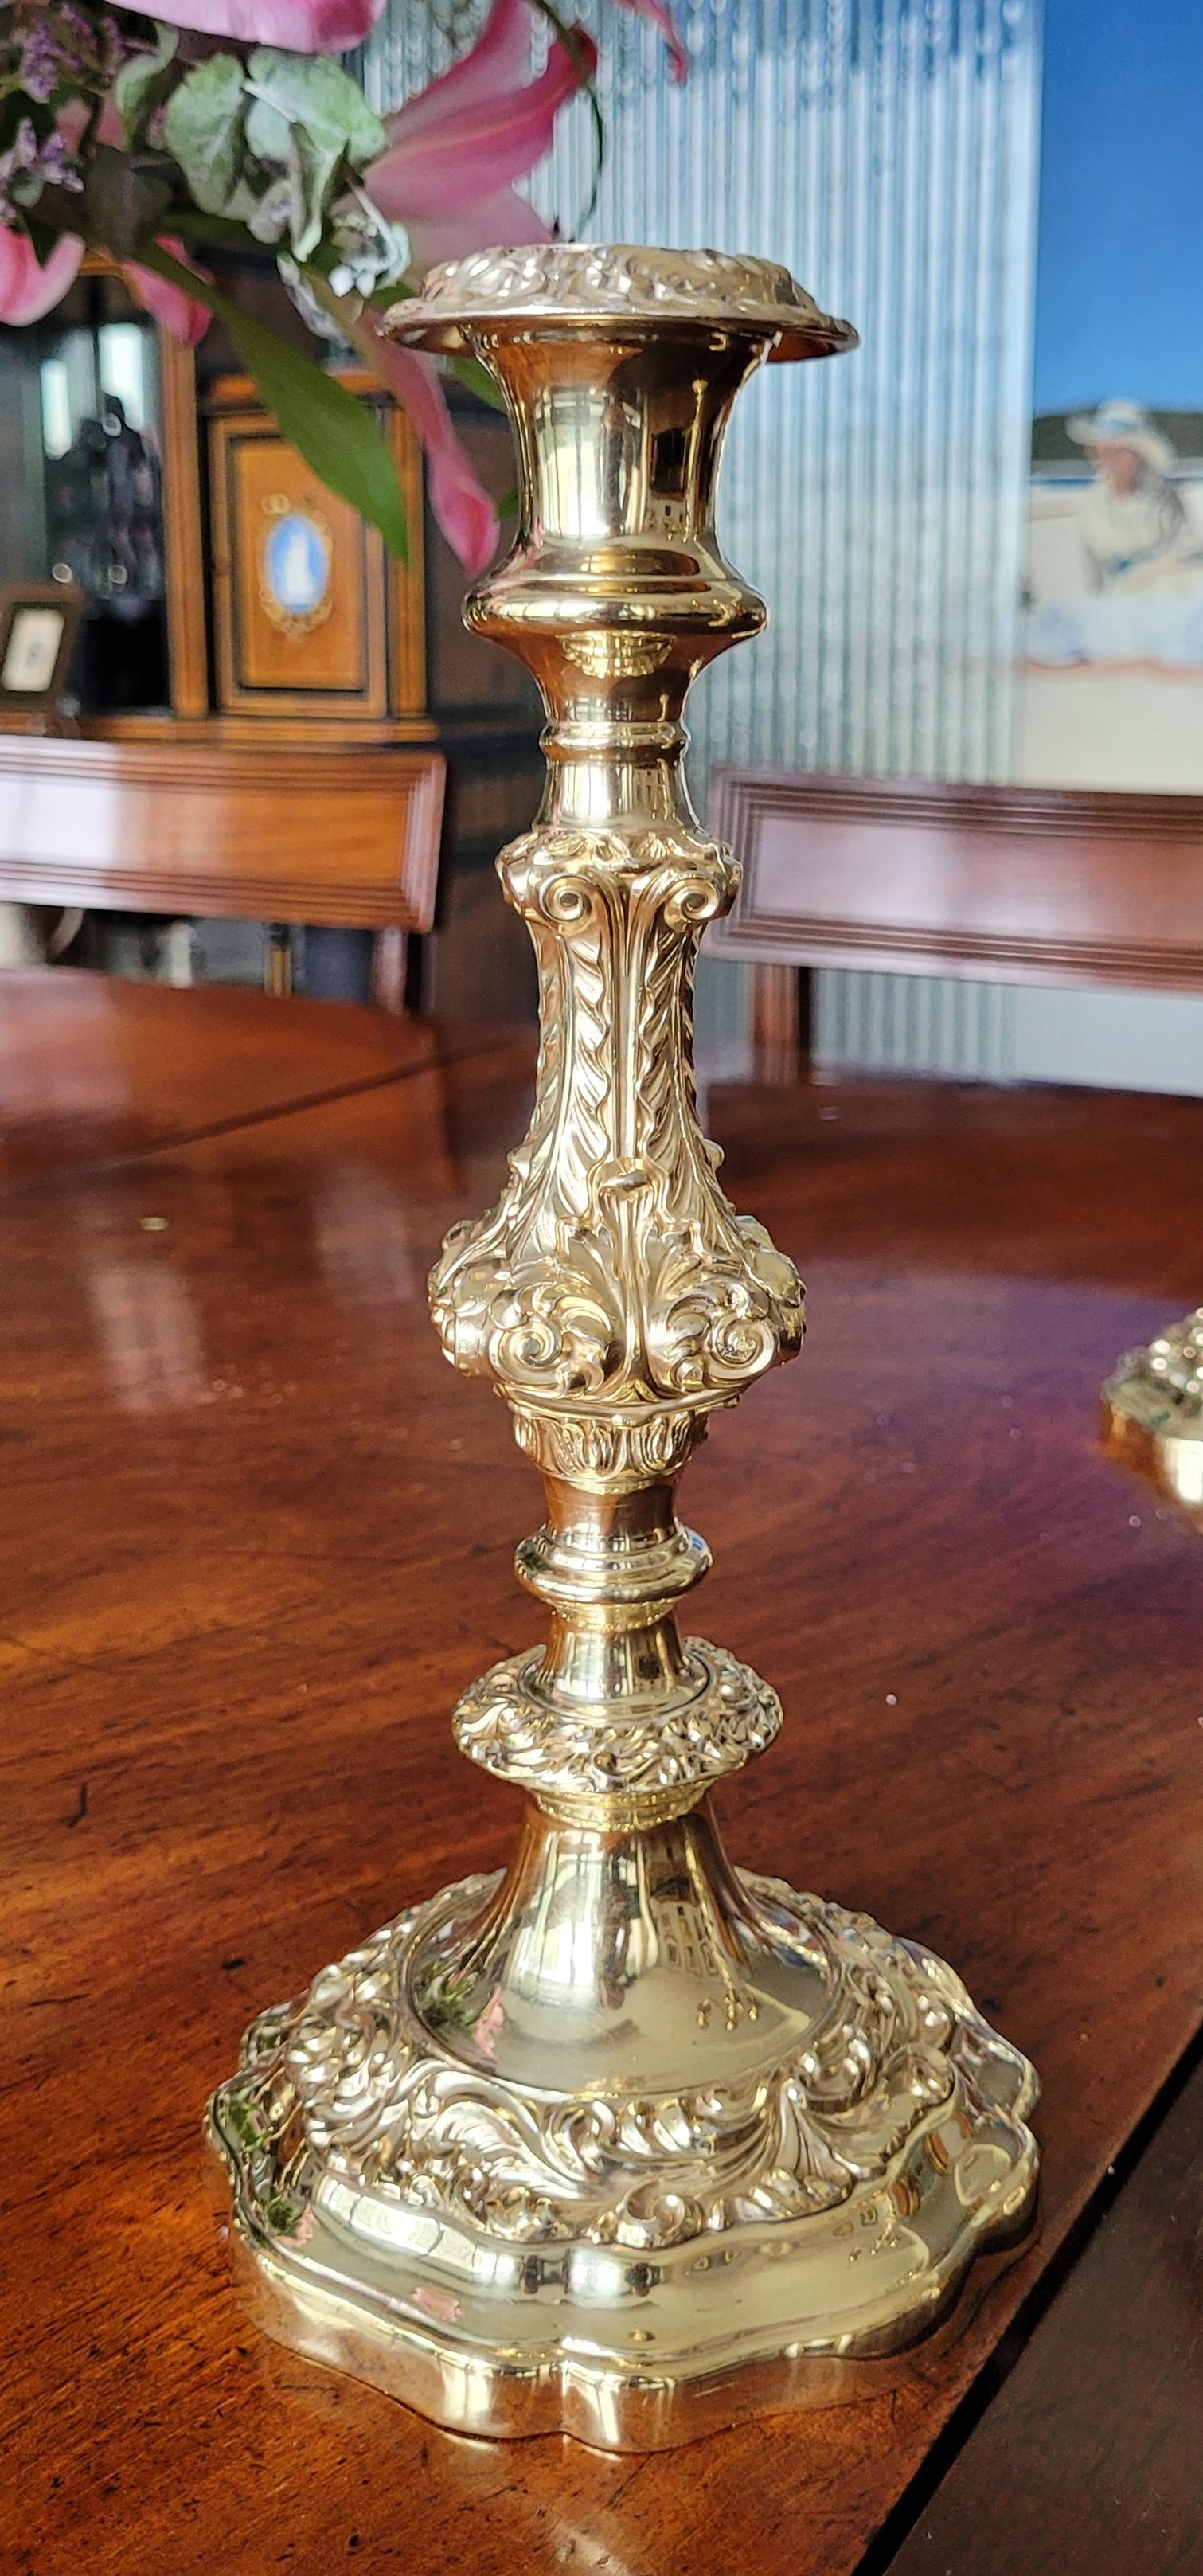 Set of Candelabra and Candelholders, Silver and Gold Plated by Gorham For Sale 9